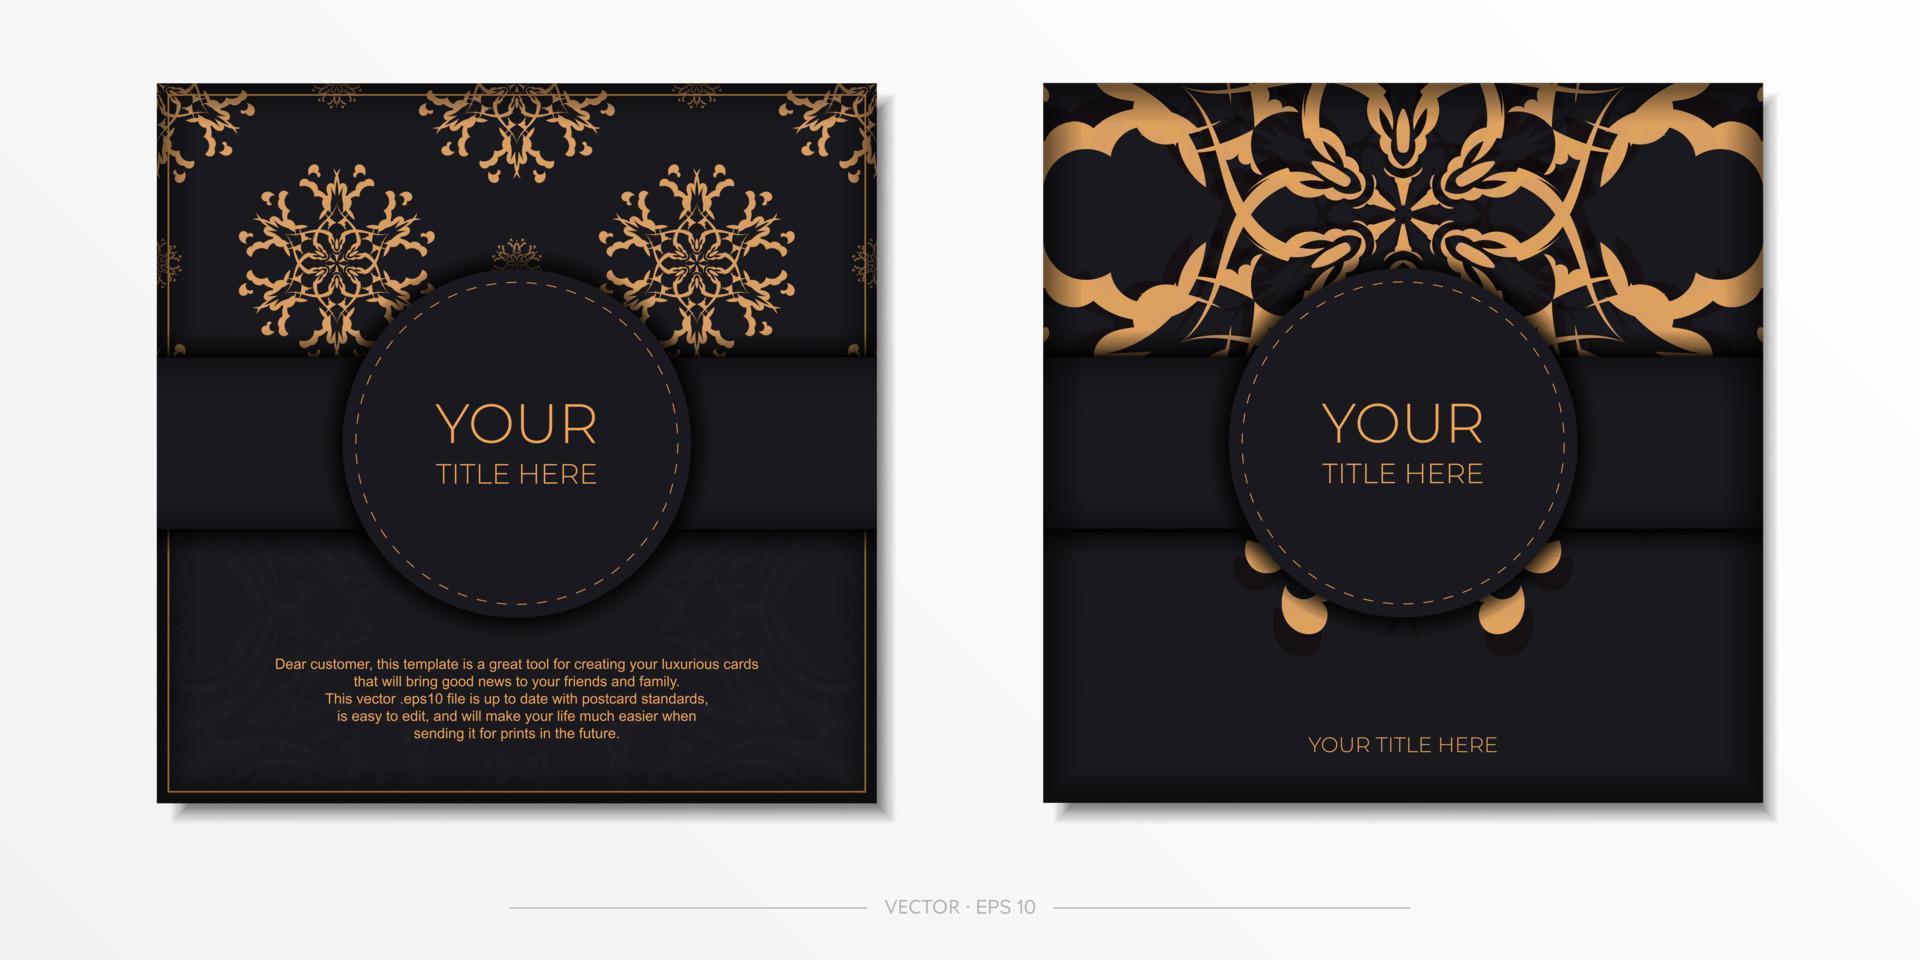 Set of vector postcards in black color with Indian patterns. Invitation card design with mandala ornament.